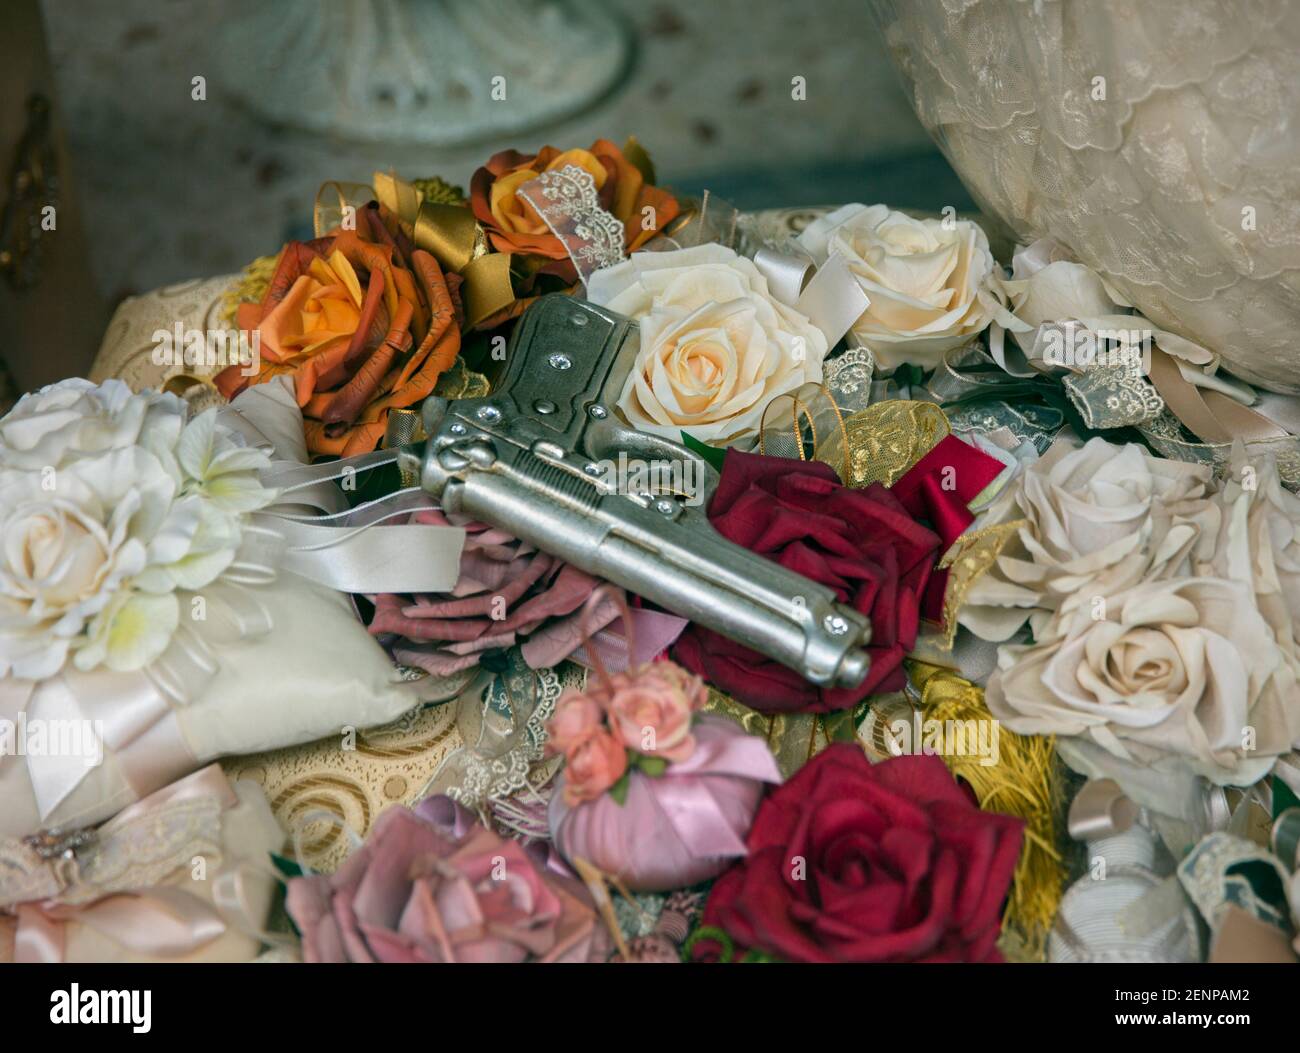 Italy, Sicily, Palermo, still life of a gun and roses Stock Photo